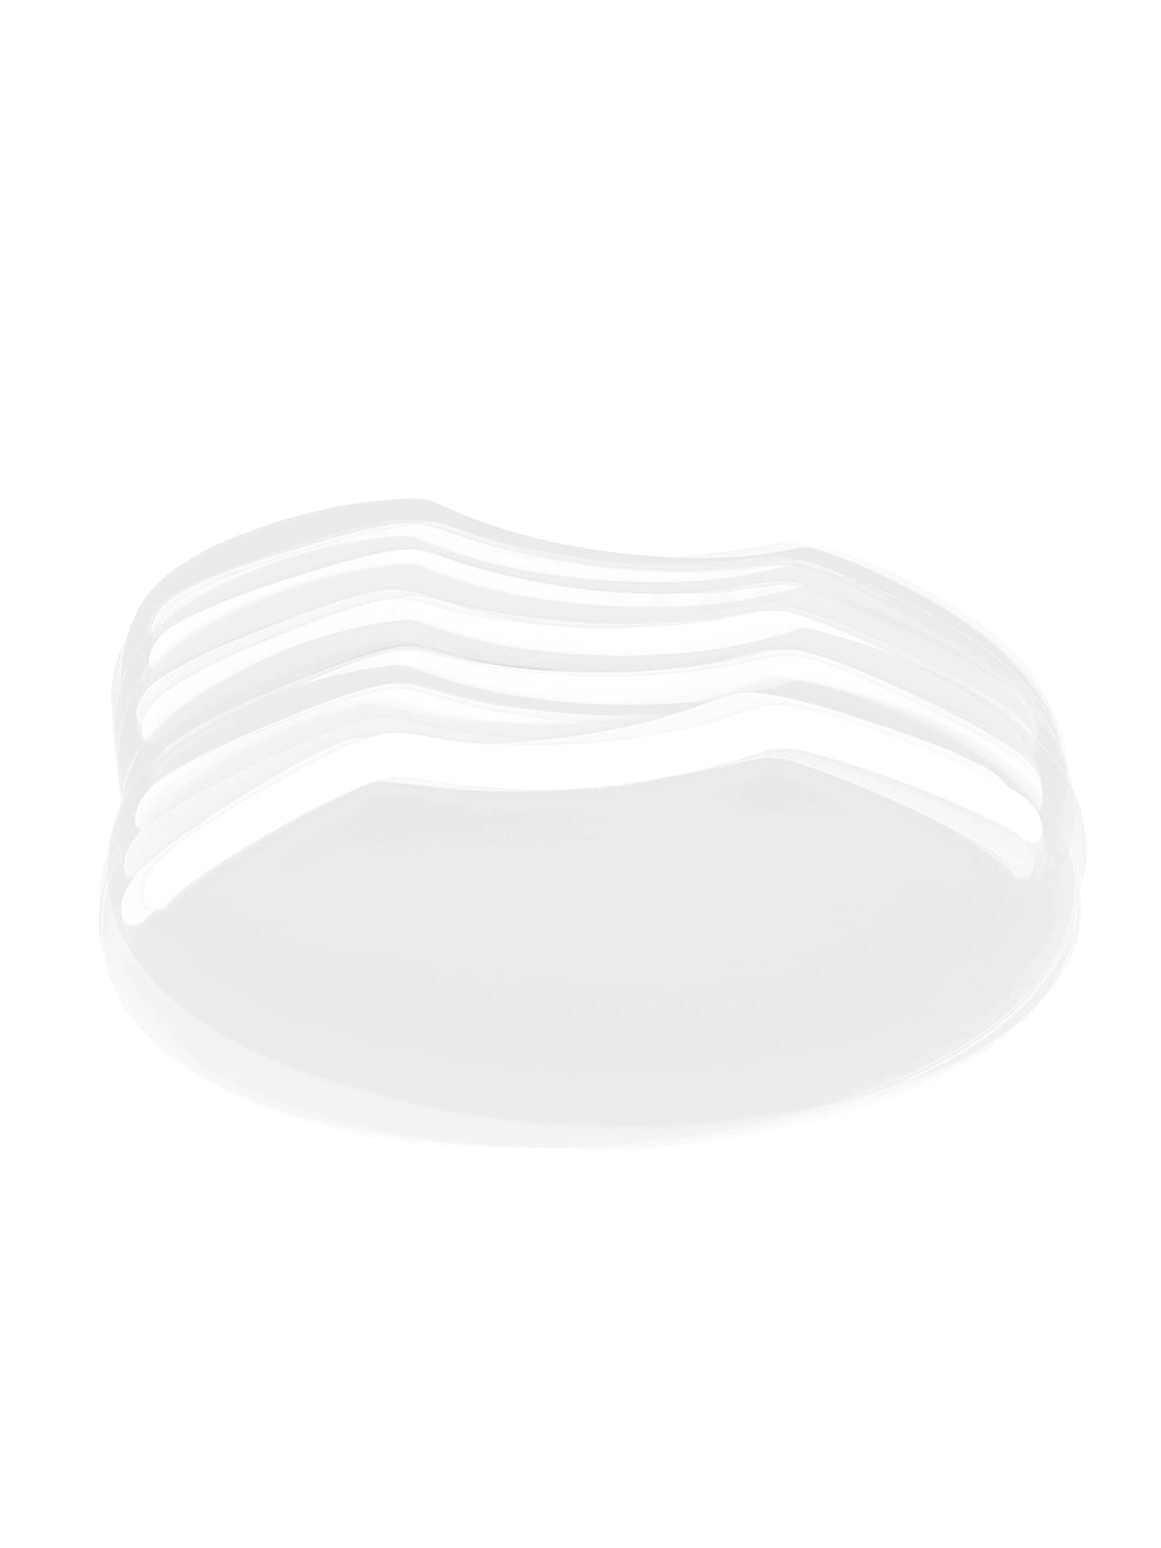 Contour Fit Clear Aftercare Shower Visor -  - HighbrowLab - HighbrowLab 